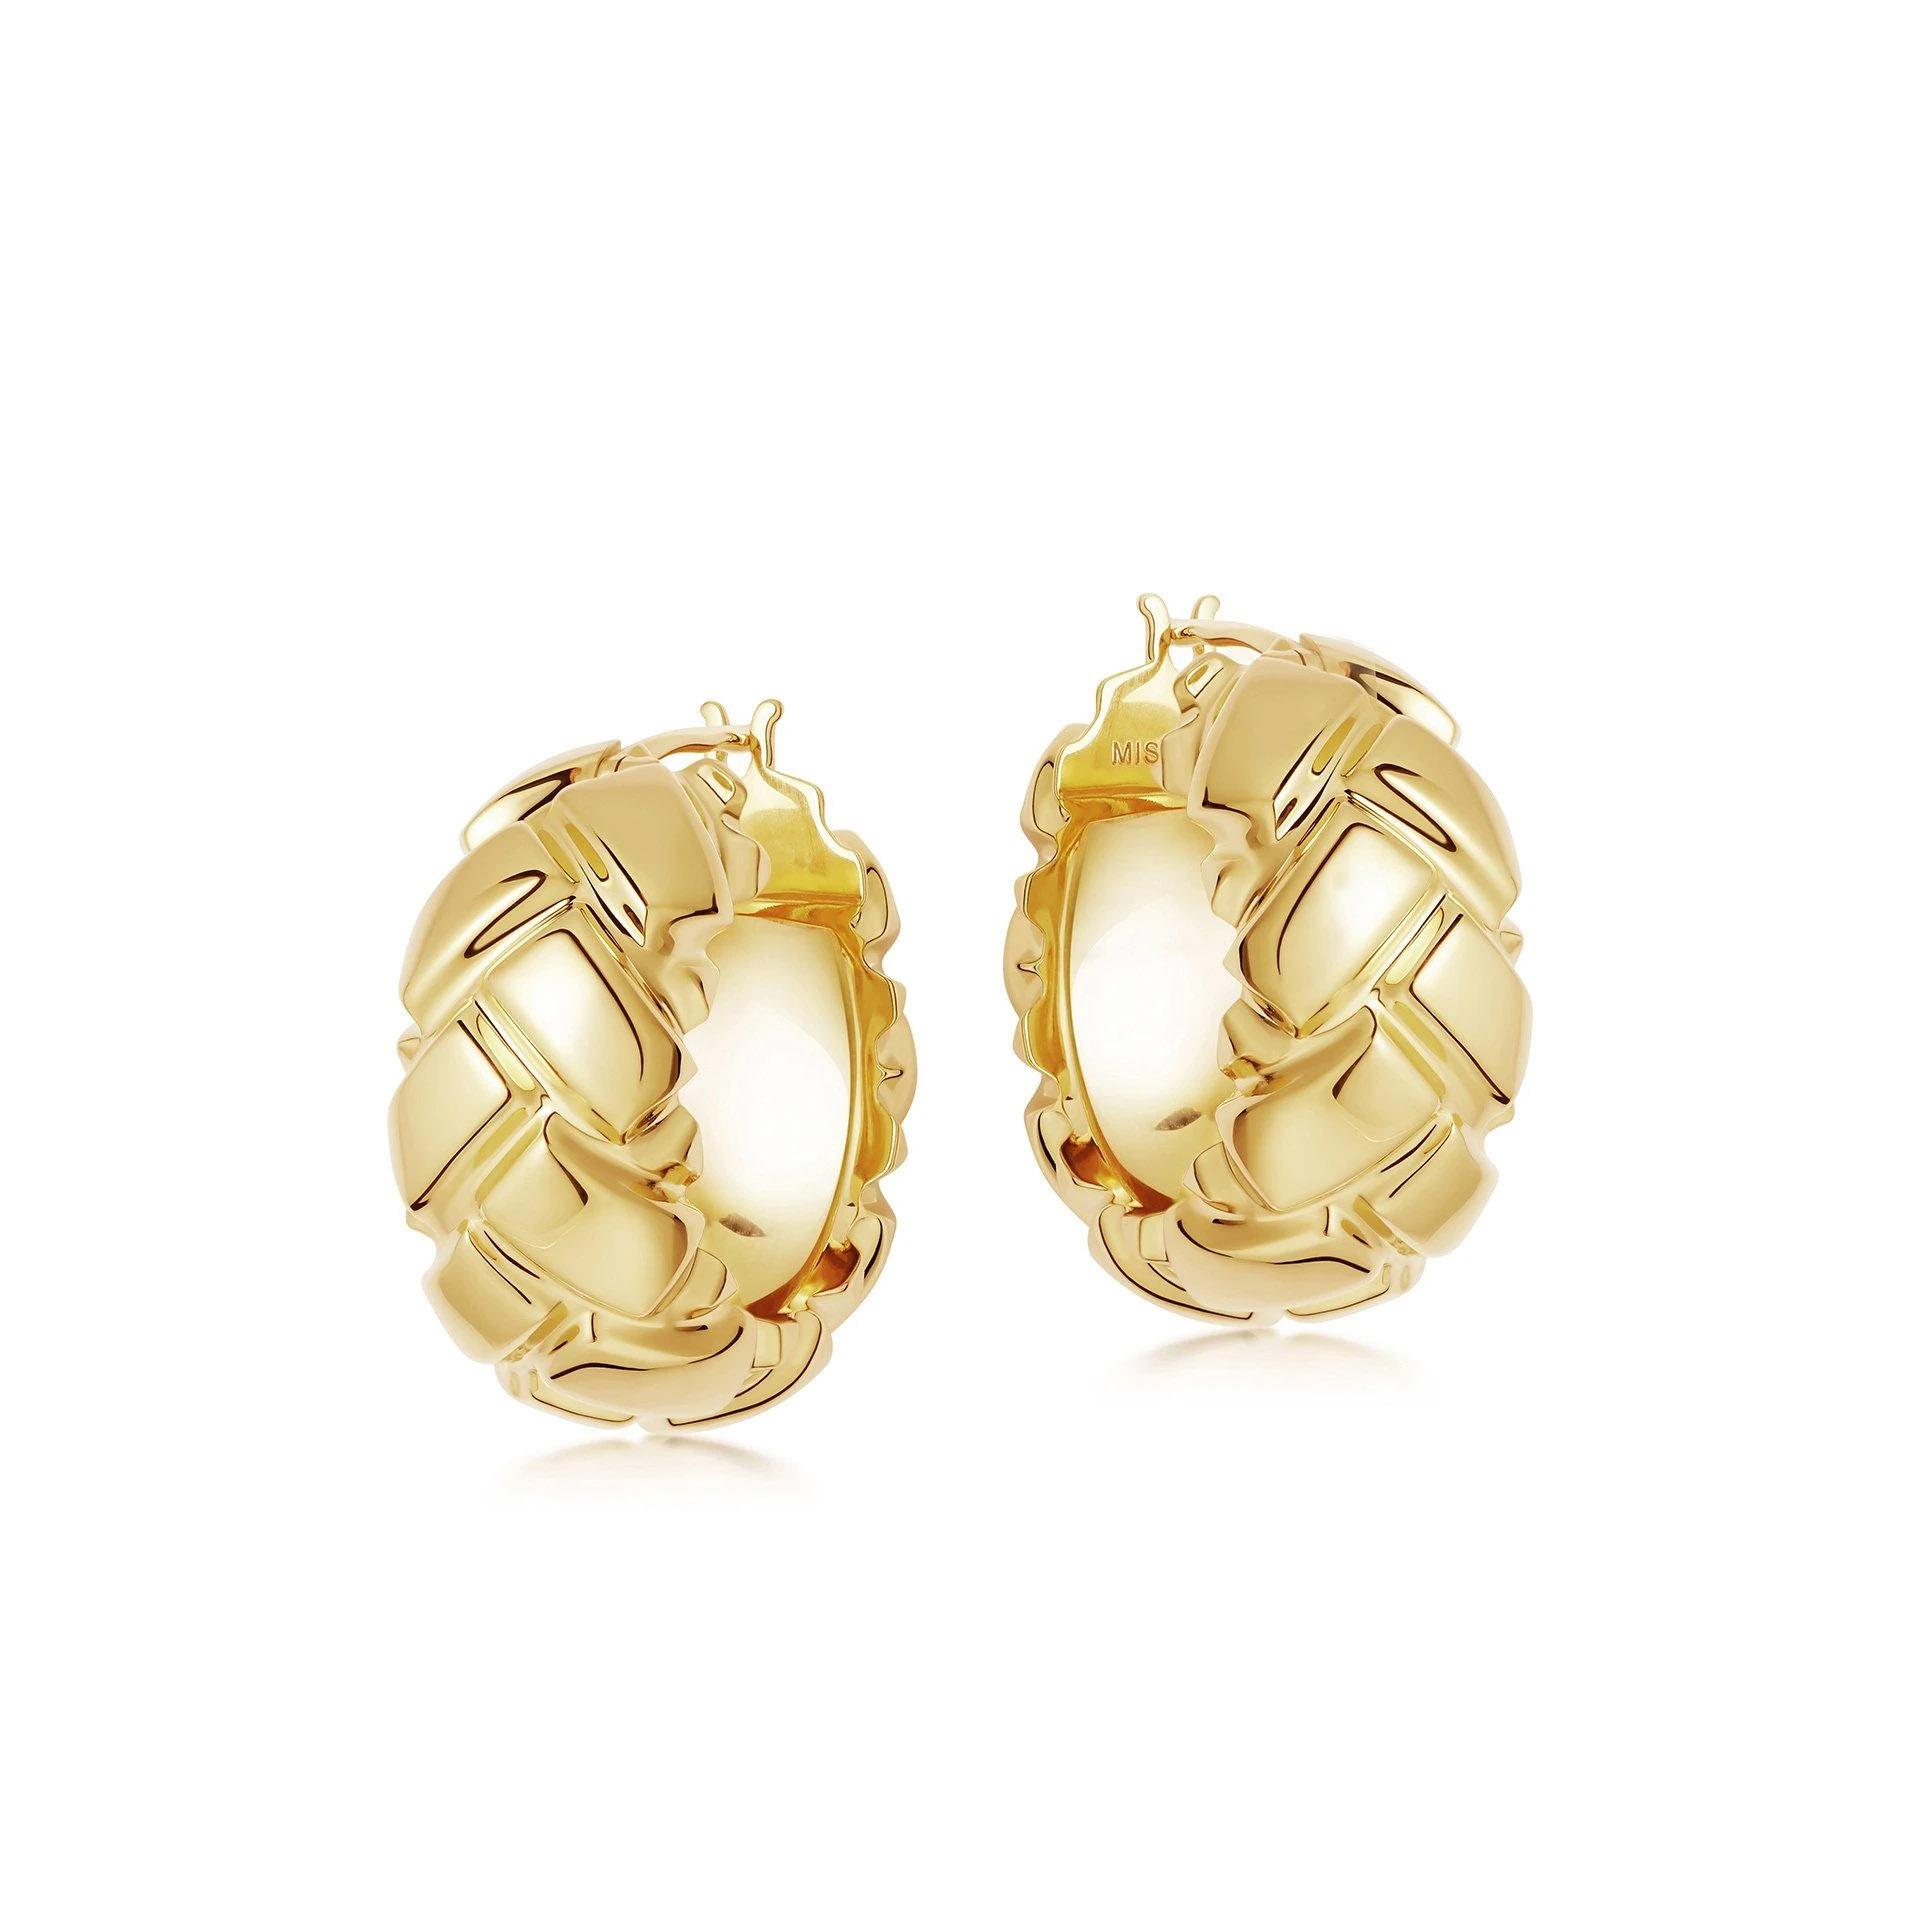 Wholesale OEM hoops earrings with OEM/ODM Jewelry 18ct Gold Plated On Brass offer personalised custom design